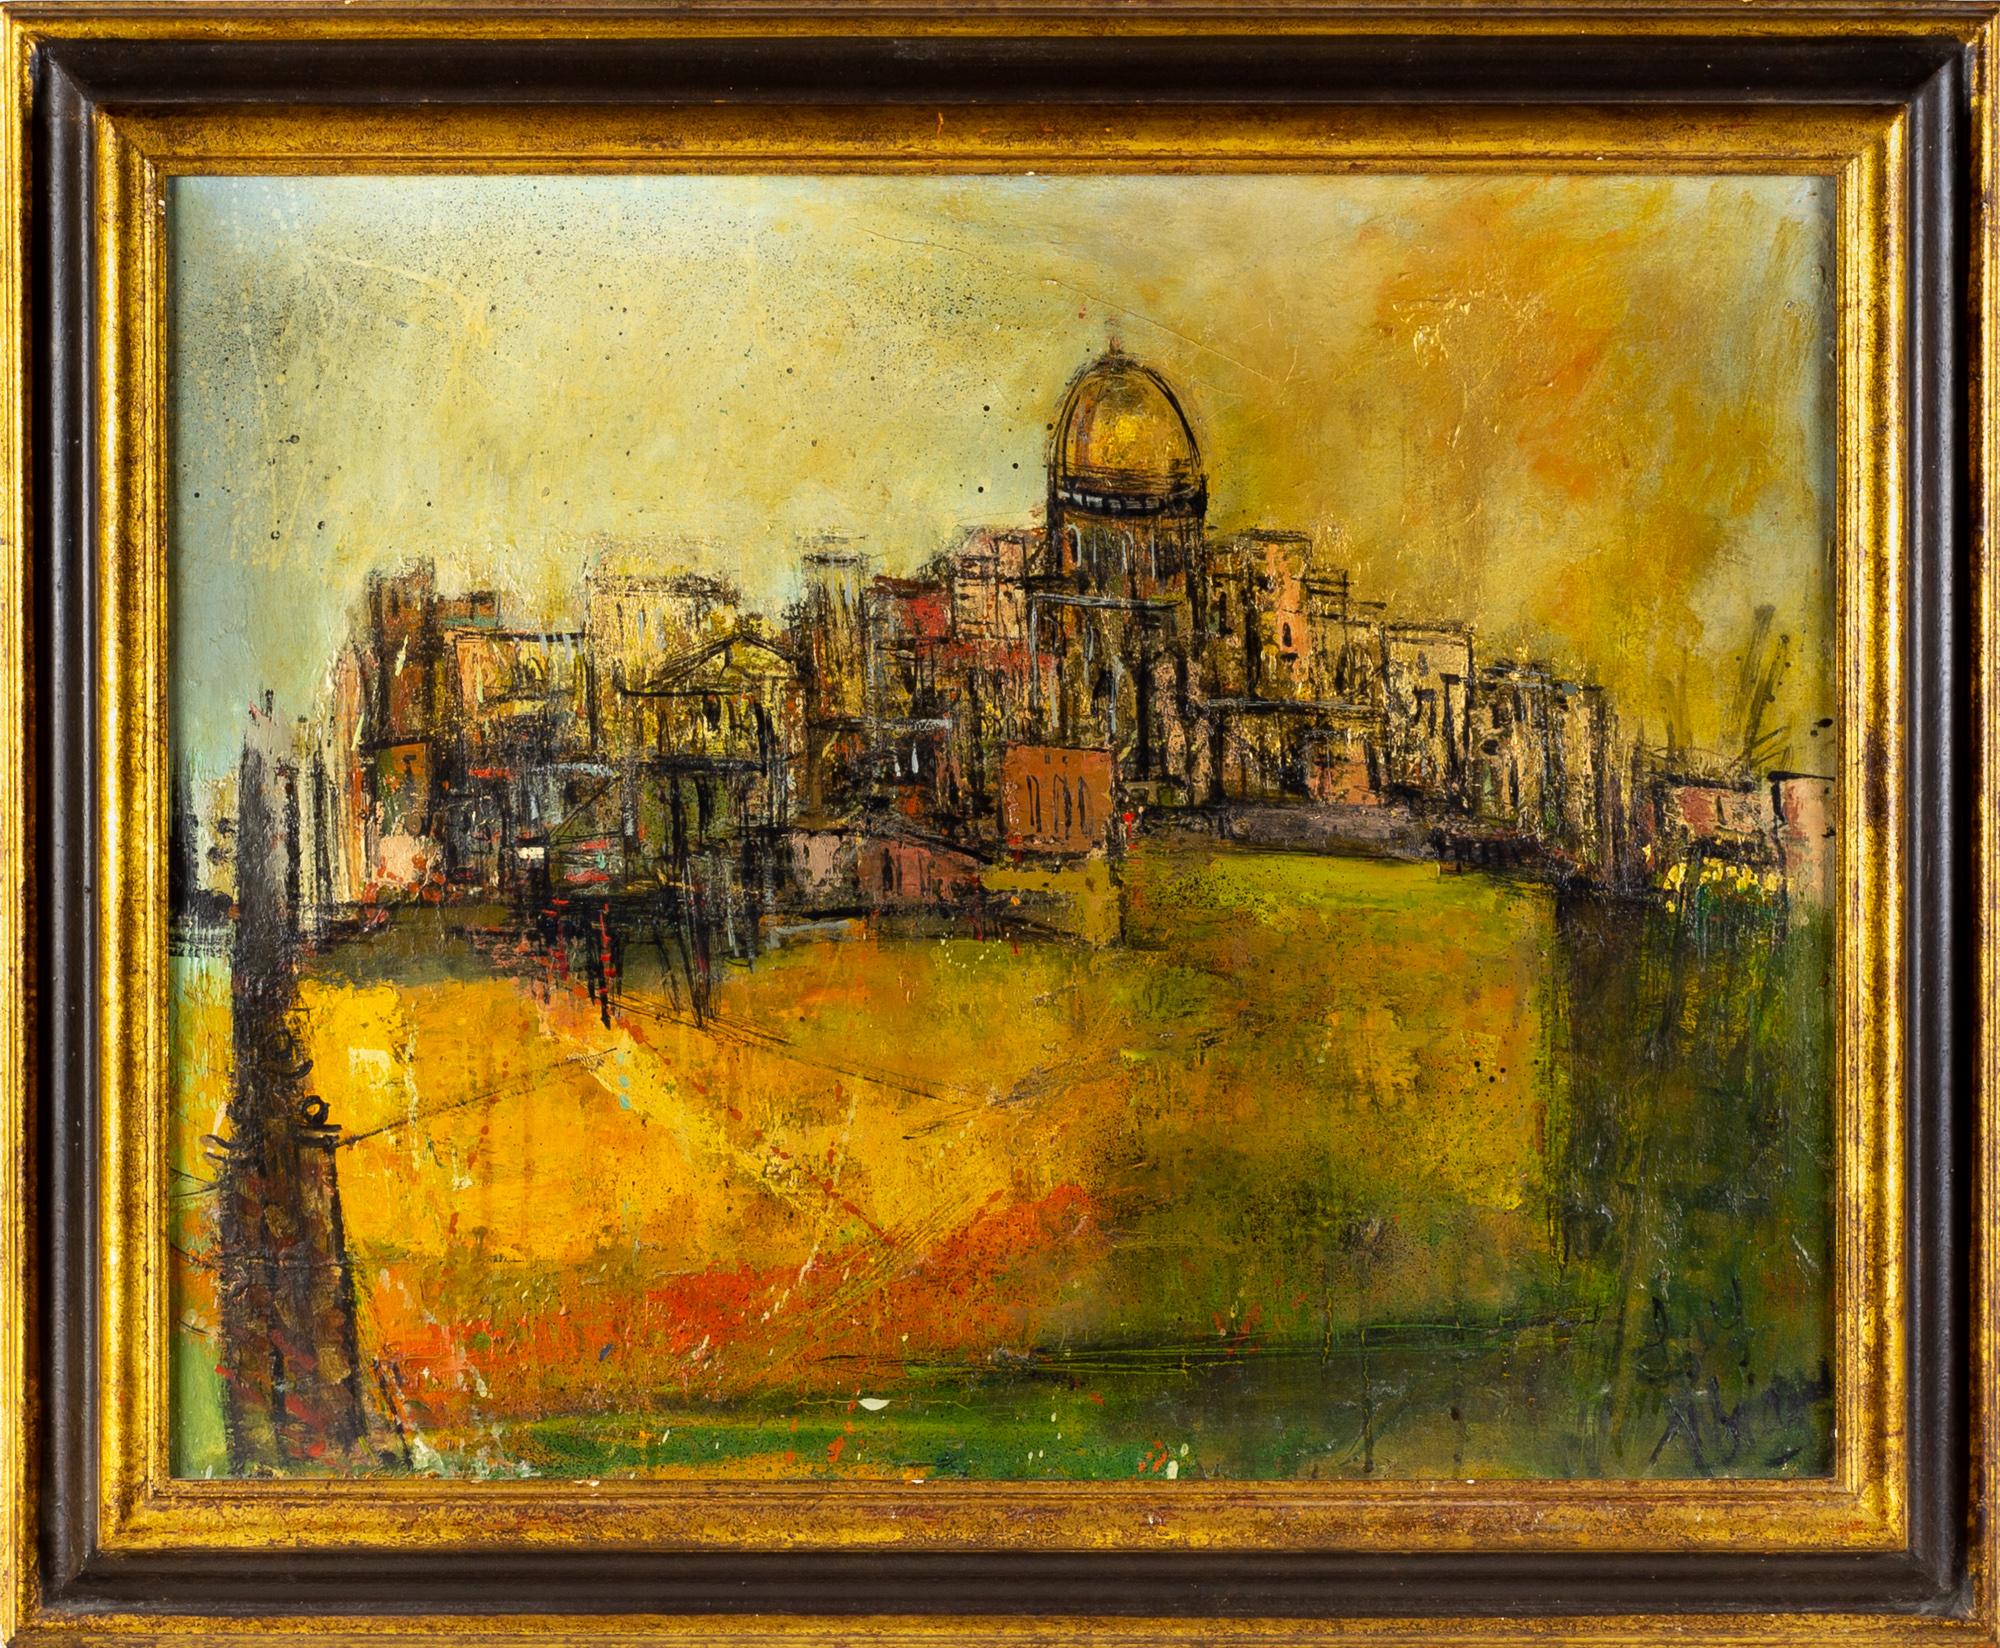 Mid-Century Modern cityscape oil painting on canvas

This piece measures: 33.75 wide x 1.75 deep x 27.75 inches high

This Painting is in excellent vintage condition.

Each piece is carefully cleaned and packaged before being shipped to you.